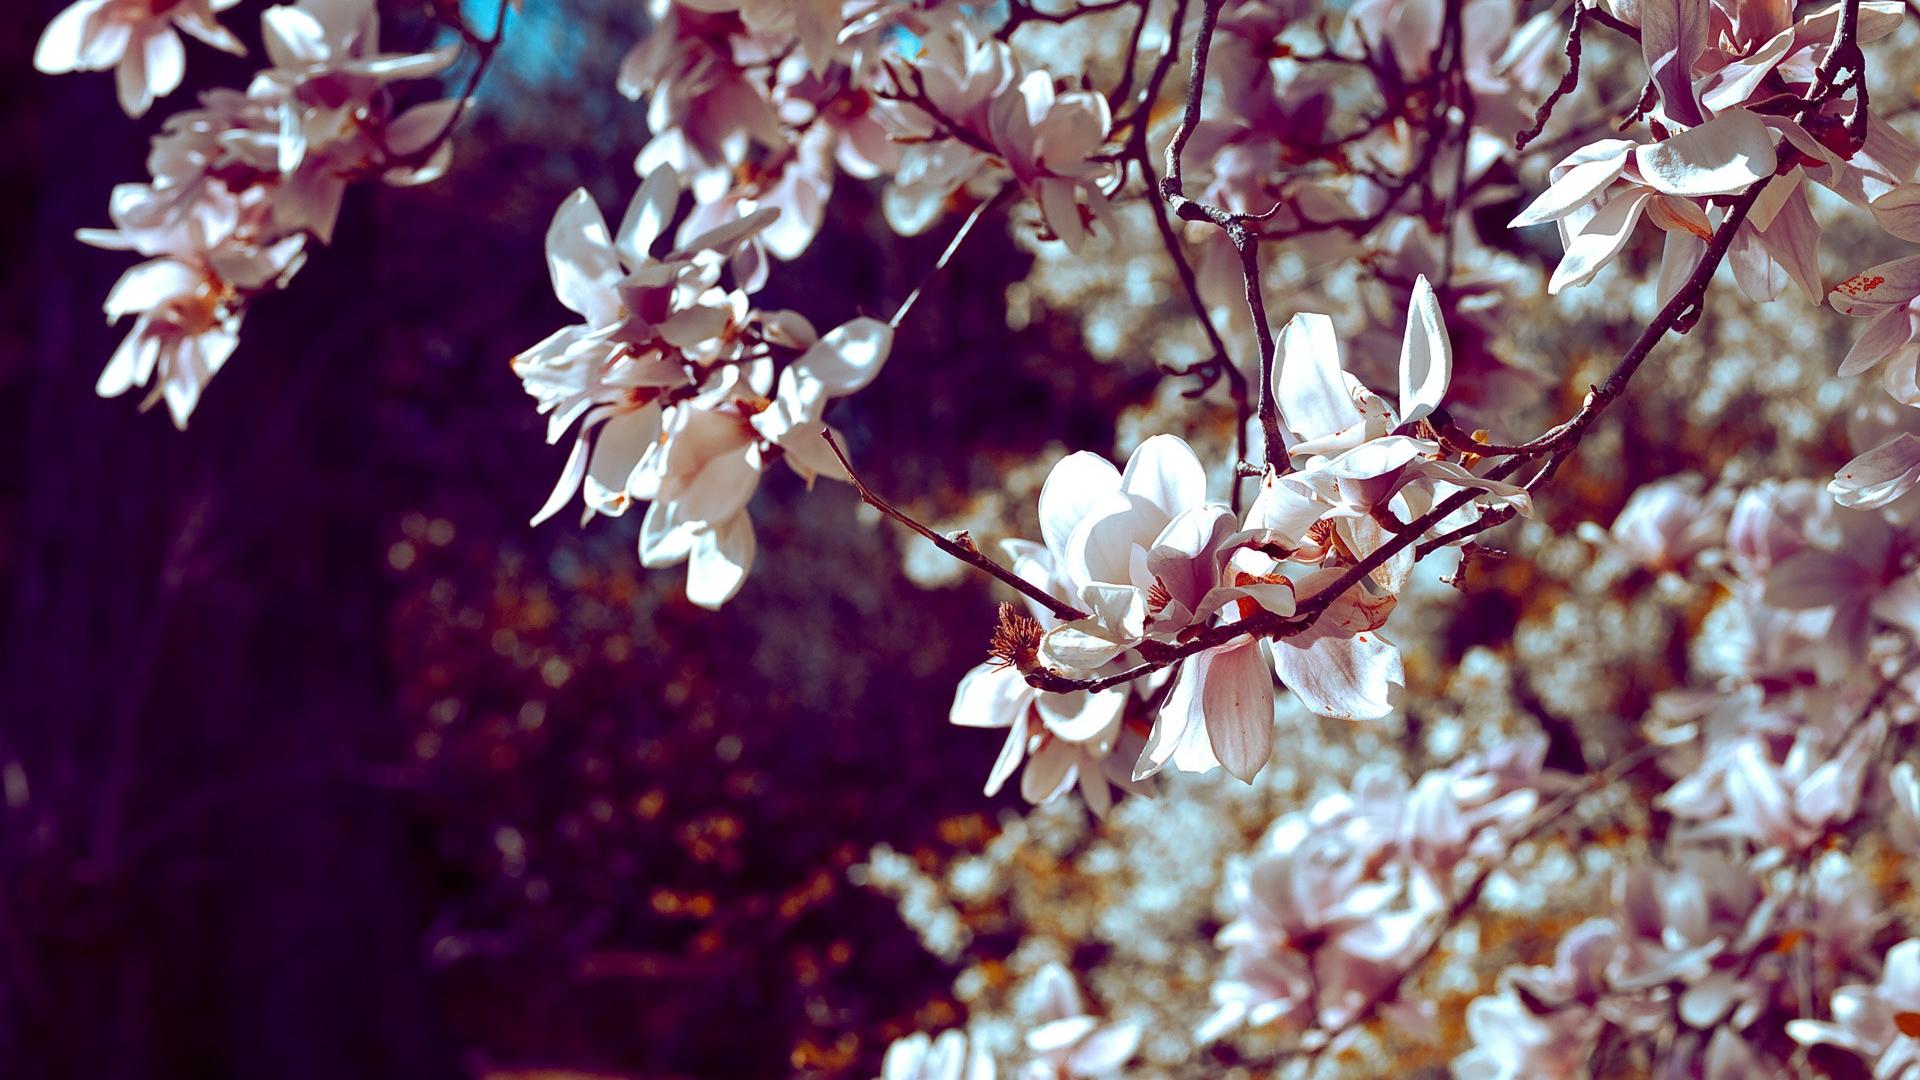 Cherry Blossom Backgrounds